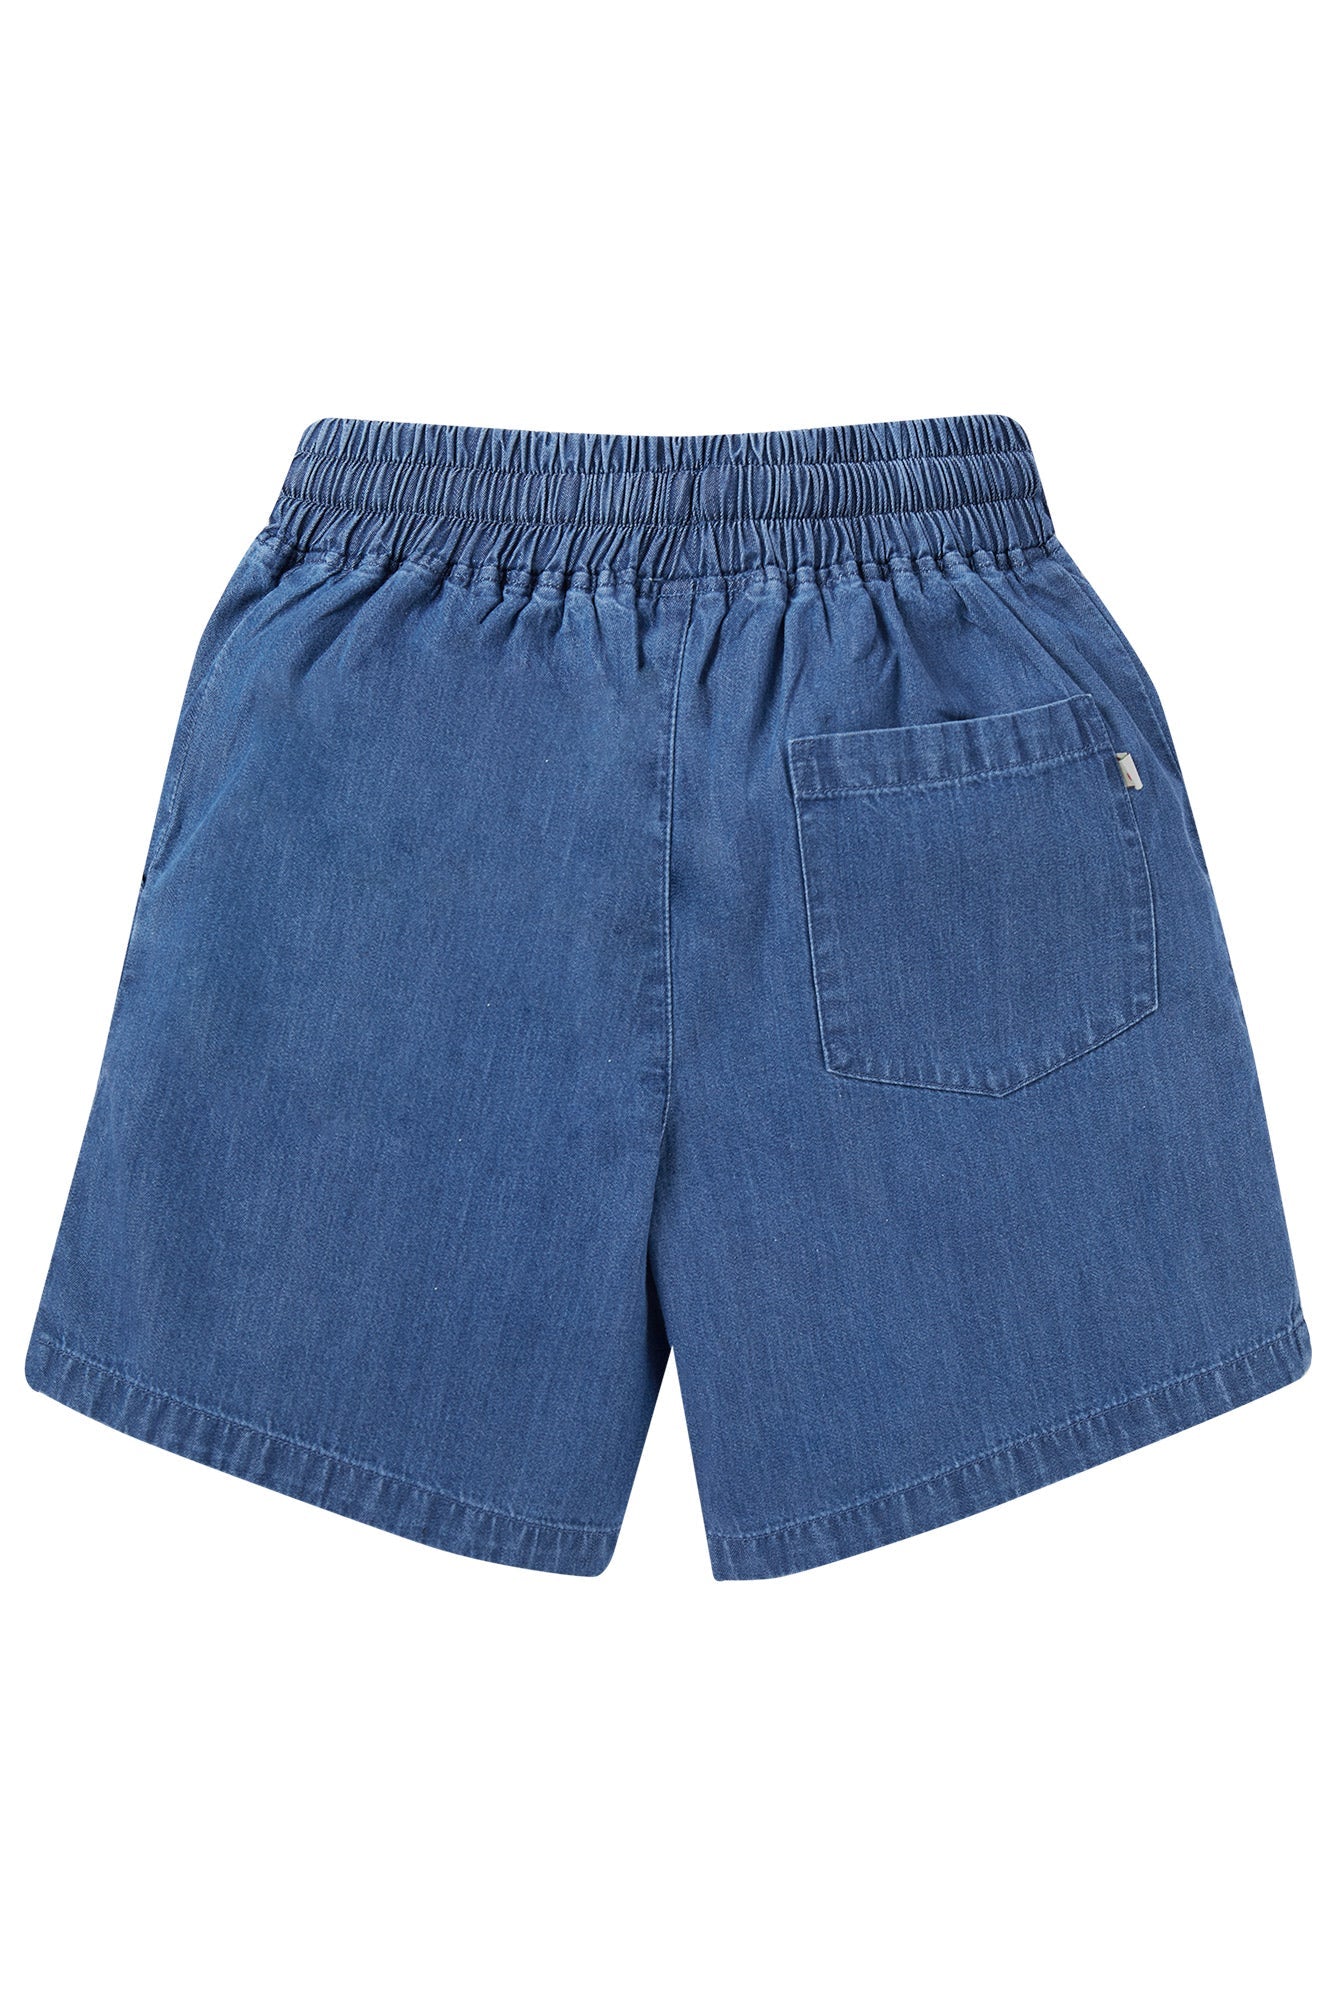 Frugi Cubert Chambray Shorts - Chambray-Kids-Ohh! By Gum - Shop Sustainable